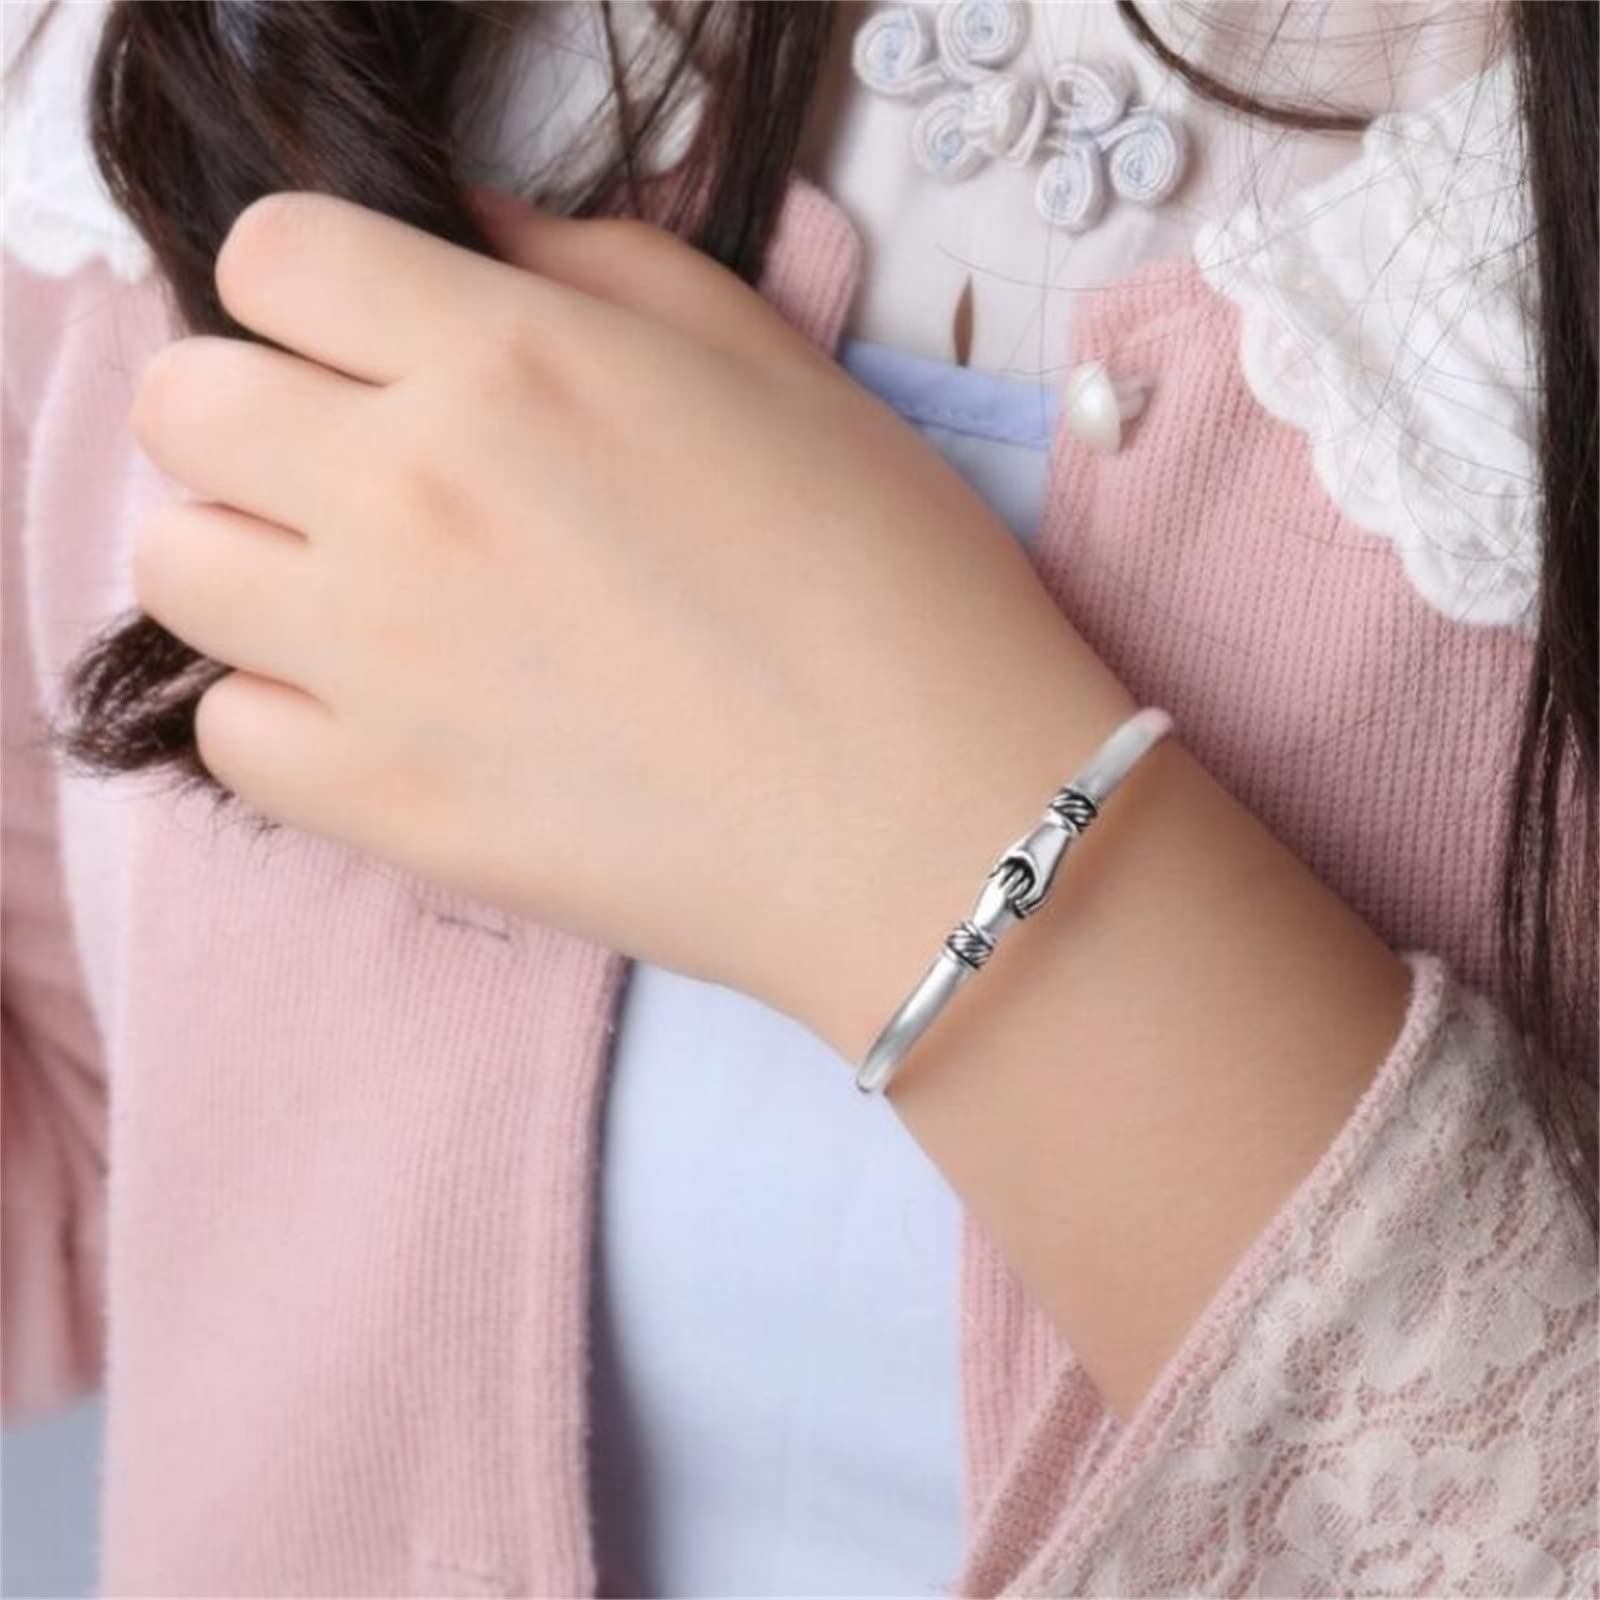 Gold Circle Opening Toggle Charm Bracelet For Women Fashionable Metal Chain  Beads Jewelry Gift R230705 From Winnii_store, $16.19 | DHgate.Com